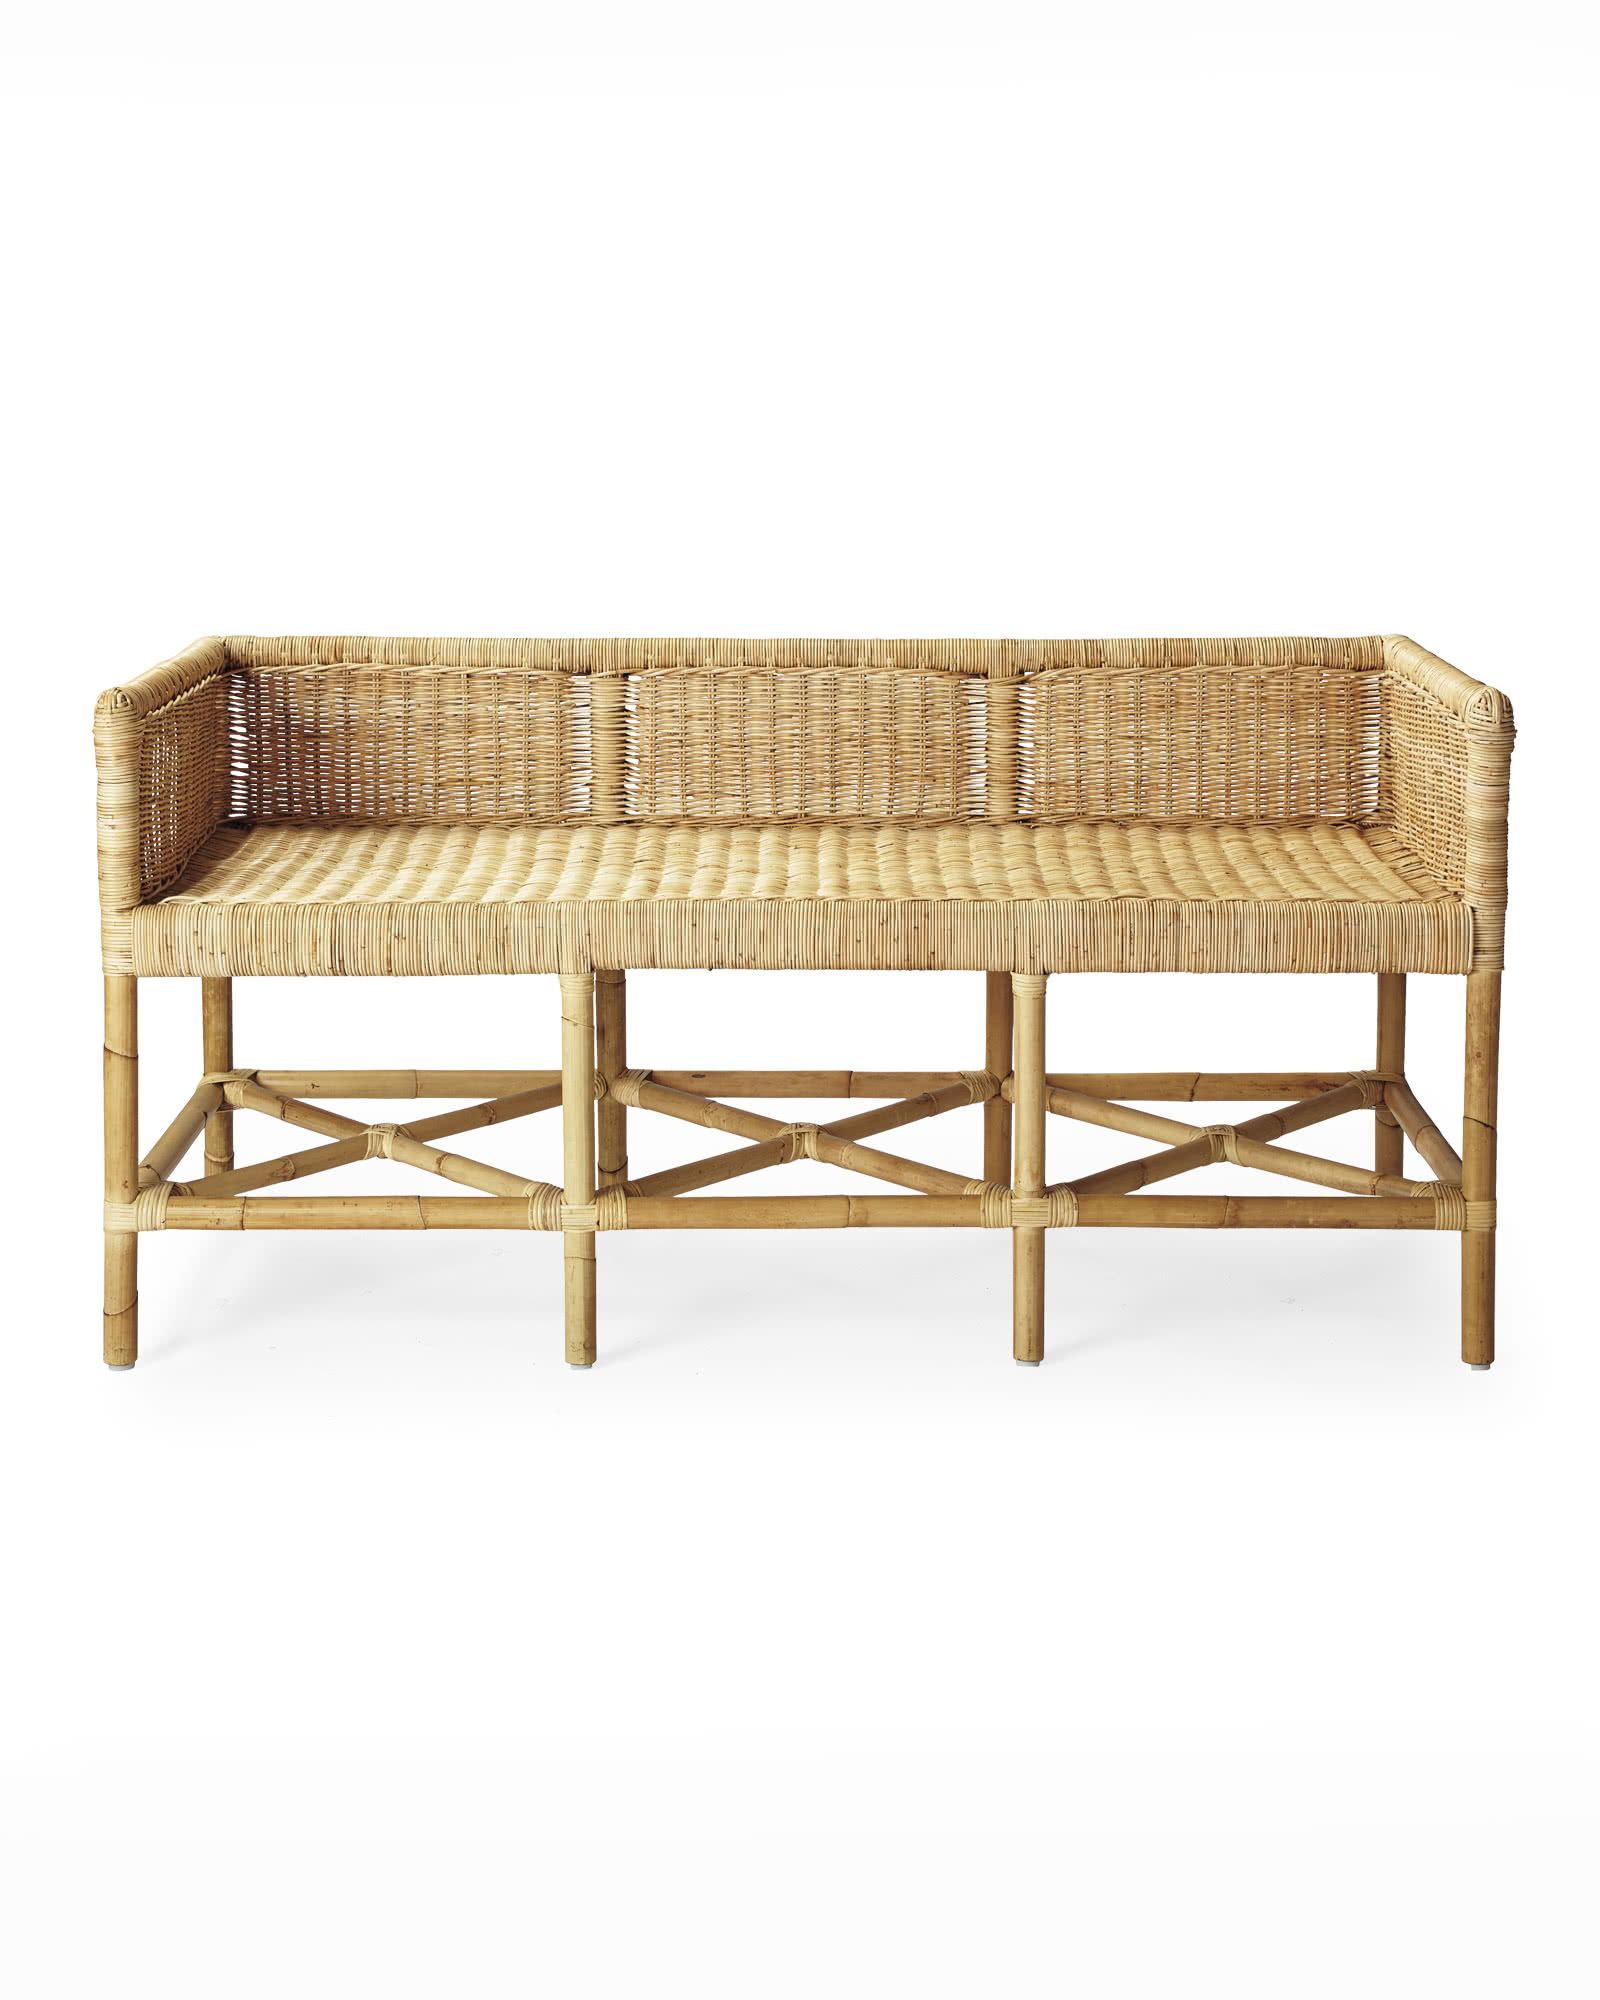 Shore Bench | Serena and Lily